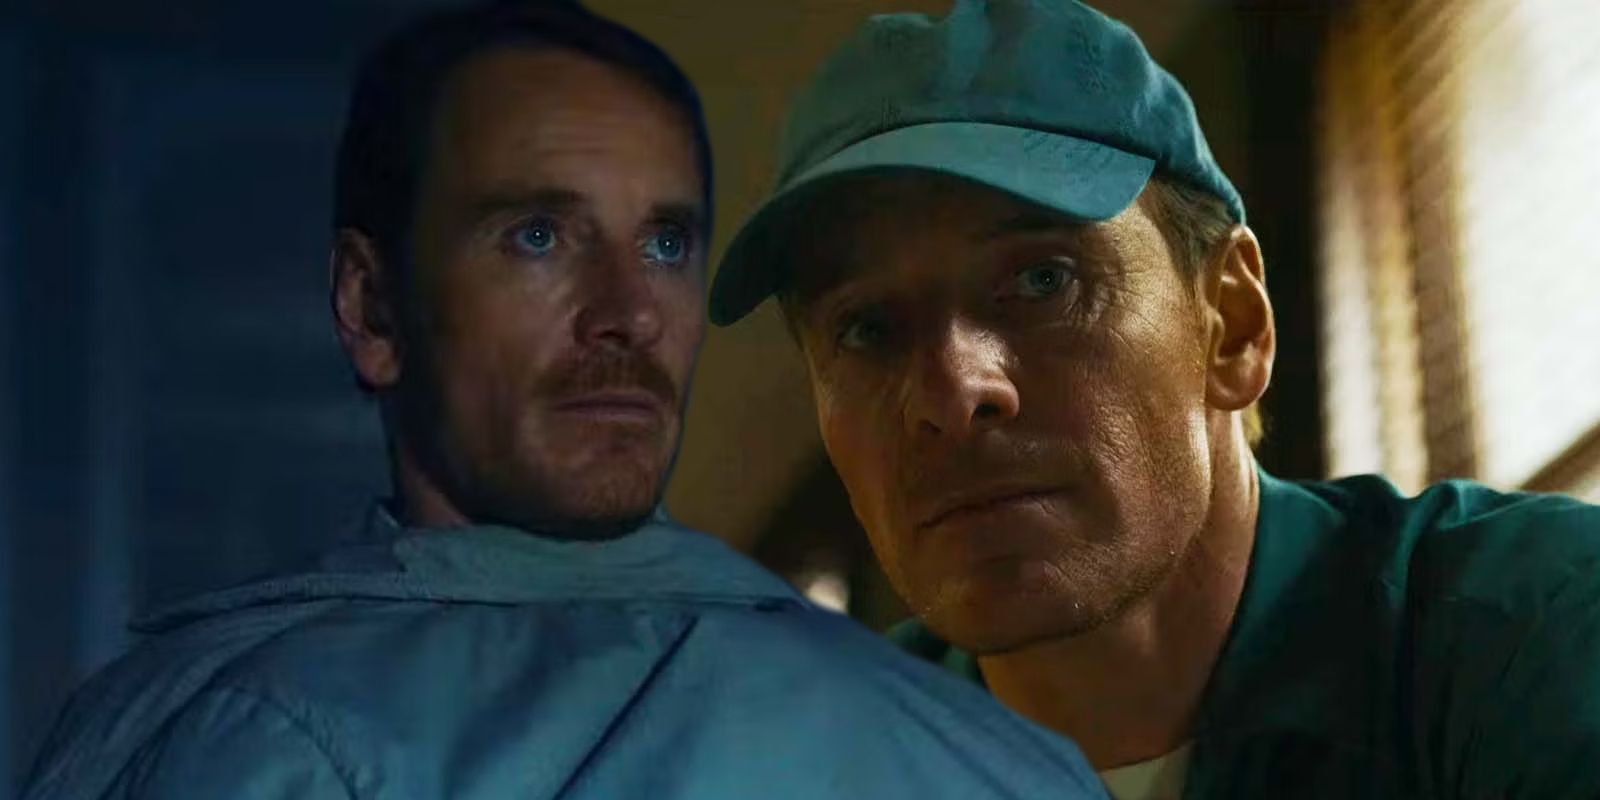 Michael Fassbender using his jacket as a blanket and Michael Fassbender in disguise in The Killer